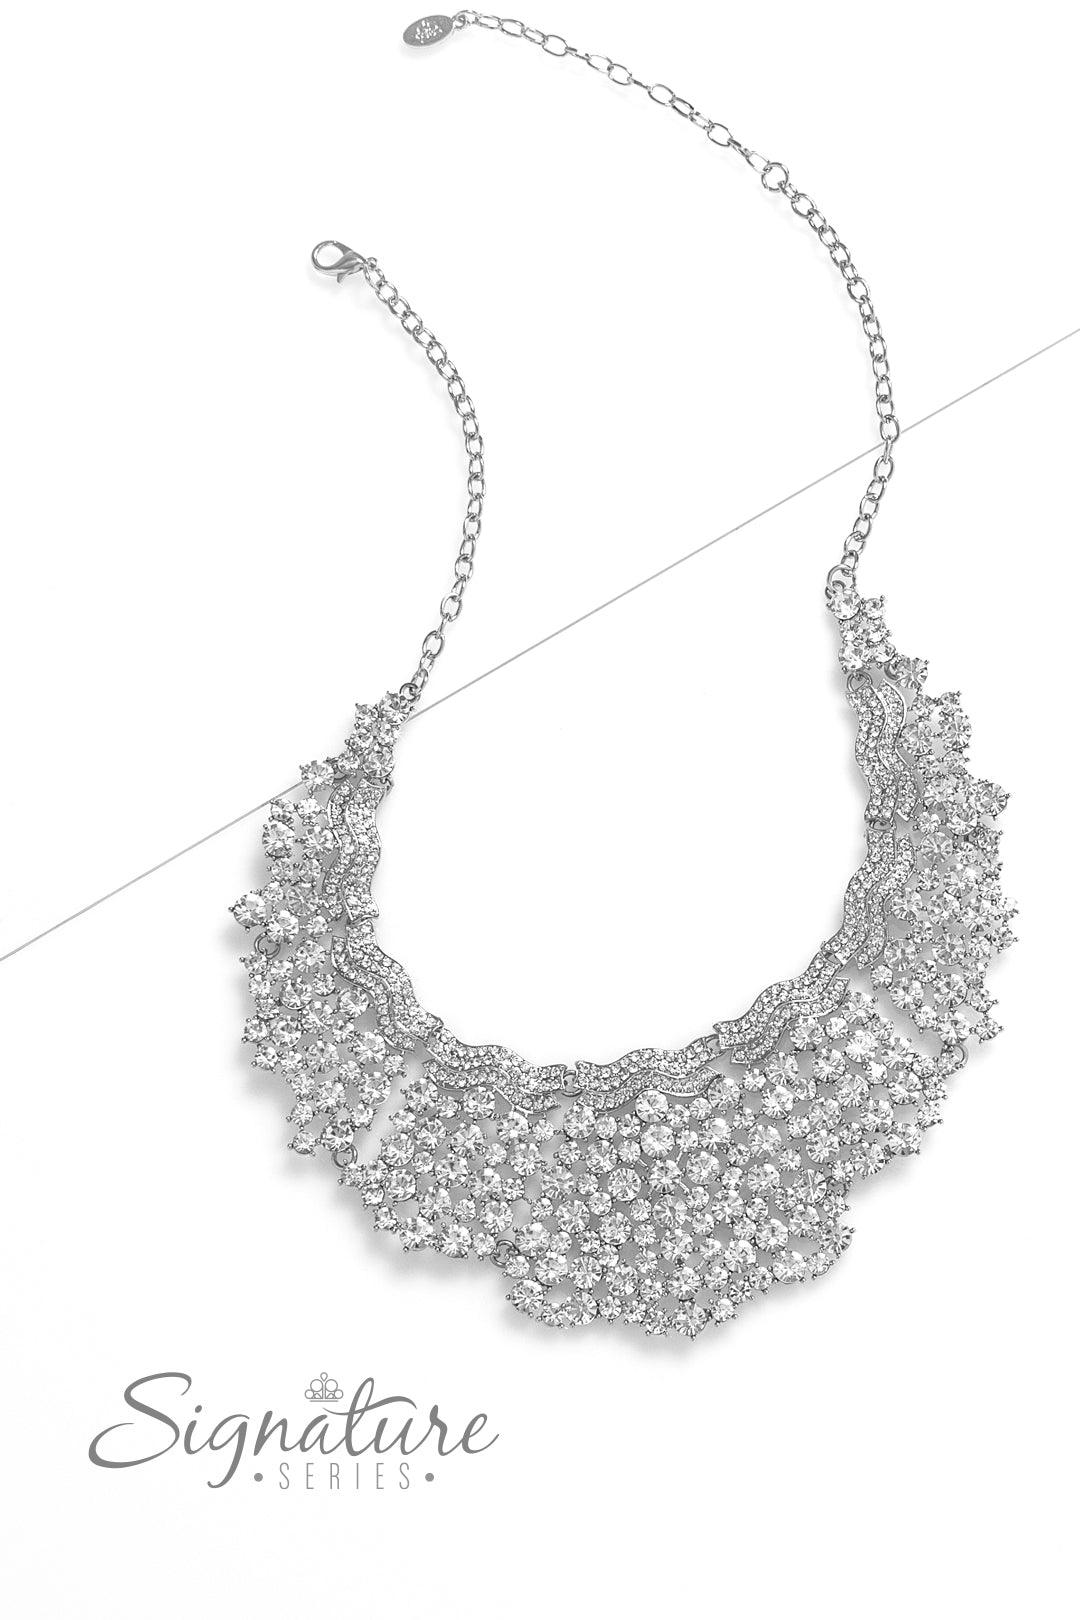 Paparazzi Accessories - The DEtta - 2023 Signature Zi Collection Necklace - Bling by JessieK